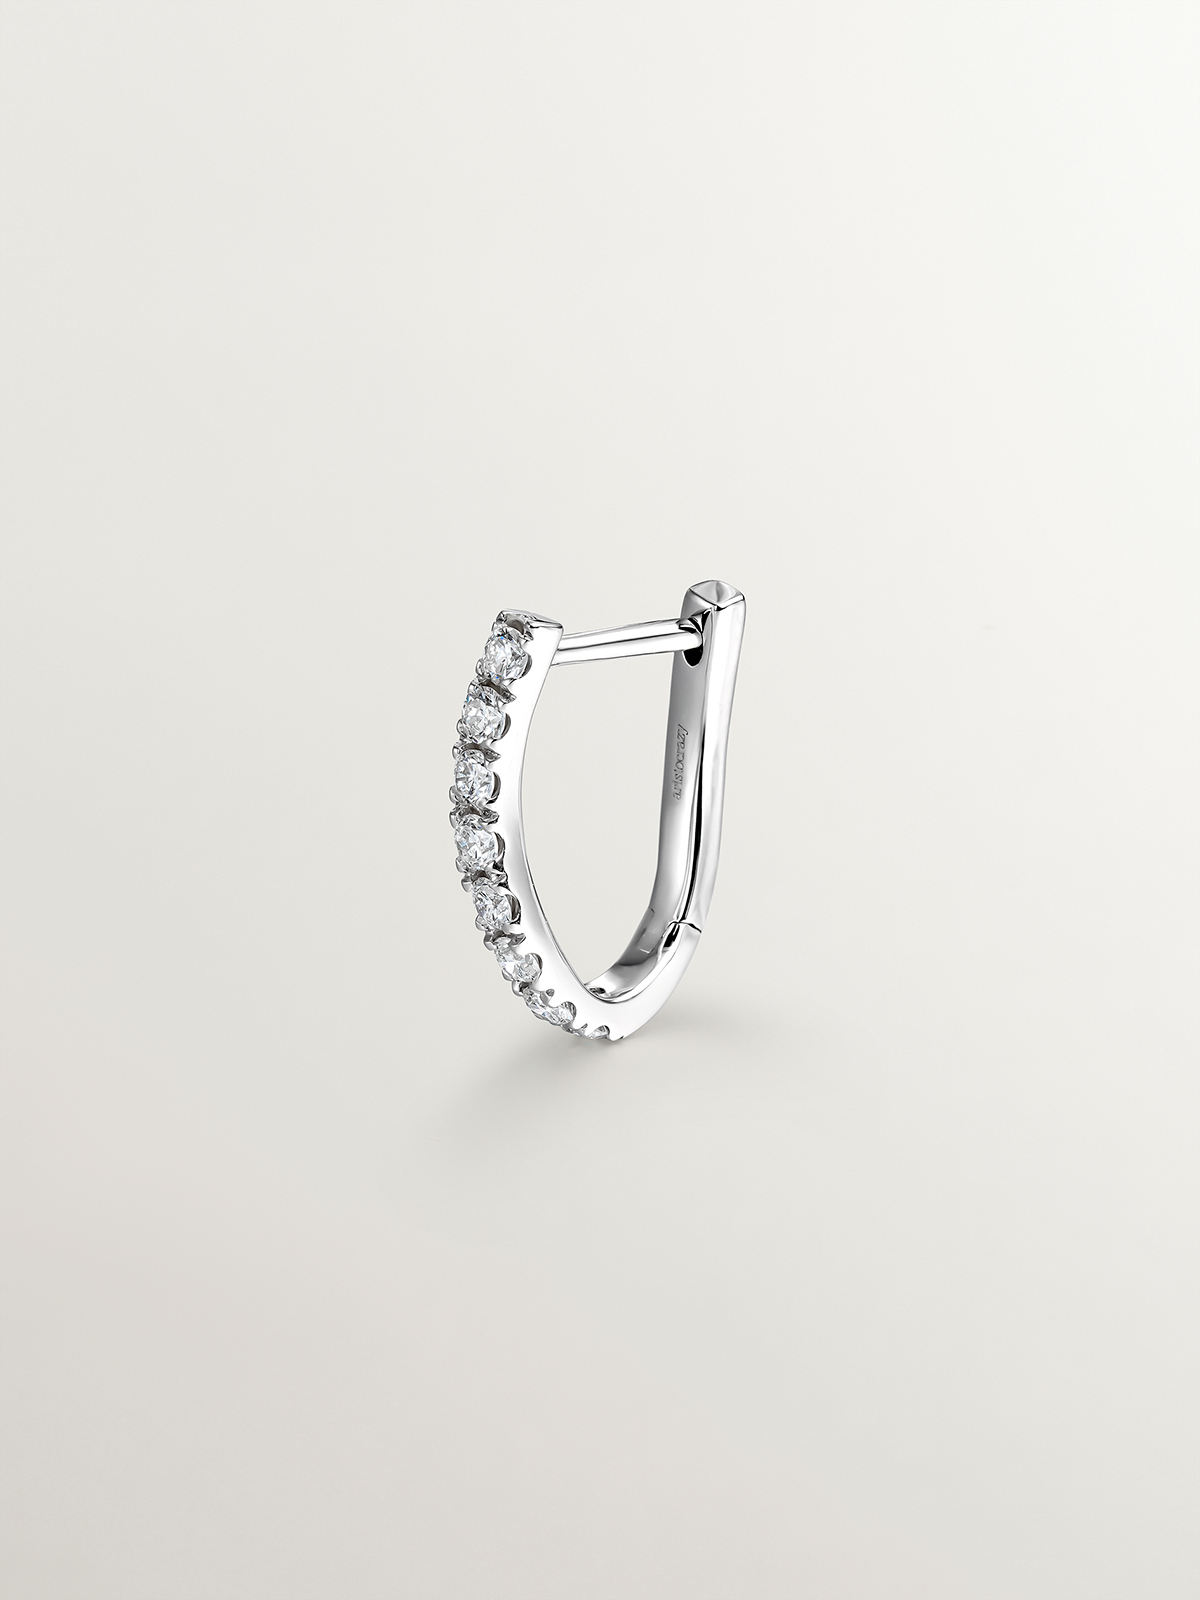 Individual earring of small 18K white gold hoop with diamonds in a wavy shape.